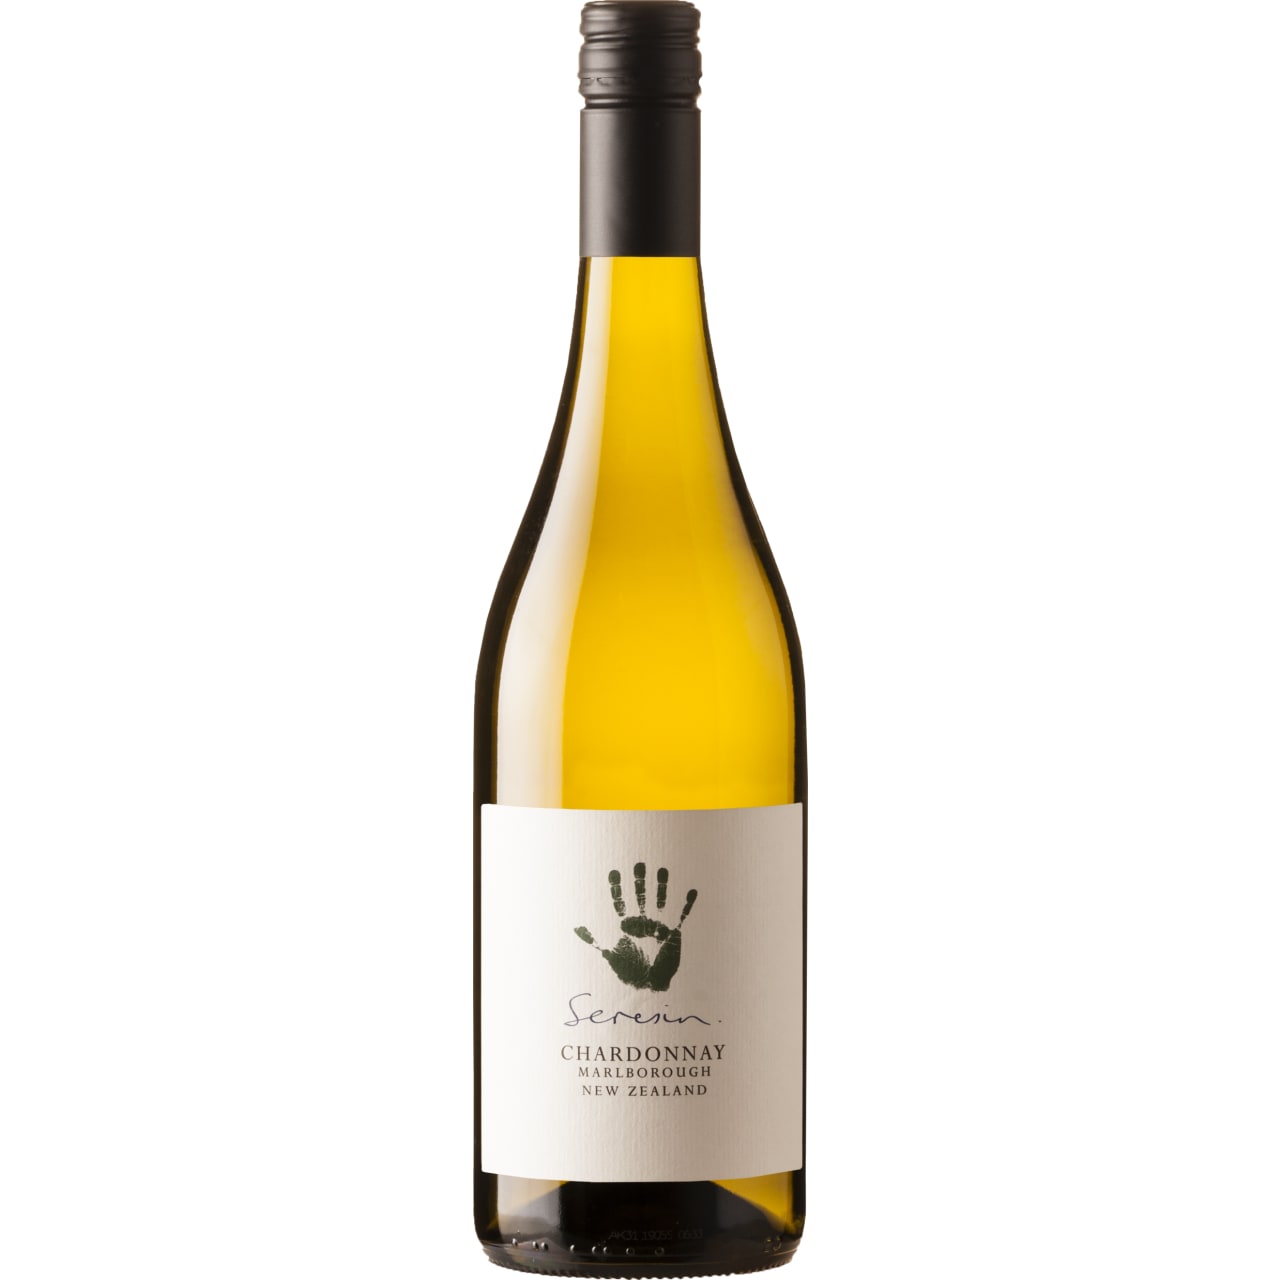 Bright golden hue, this Chardonnay evokes elegance and texture. The nose is lifted with notes of fleshy stone fruits laced with brioche.